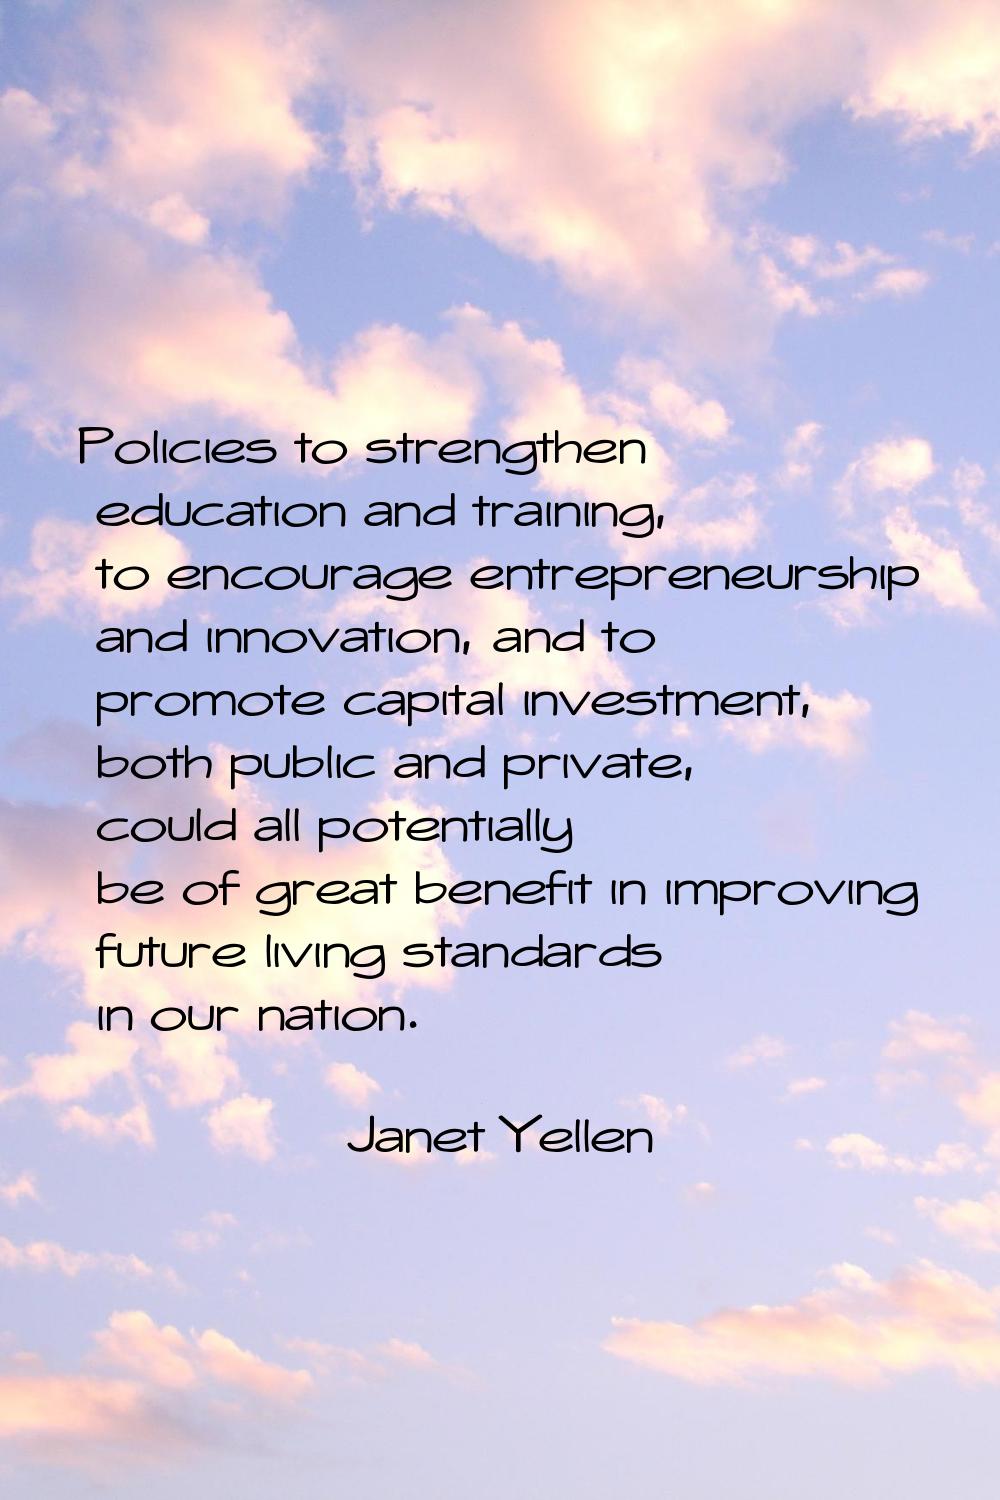 Policies to strengthen education and training, to encourage entrepreneurship and innovation, and to